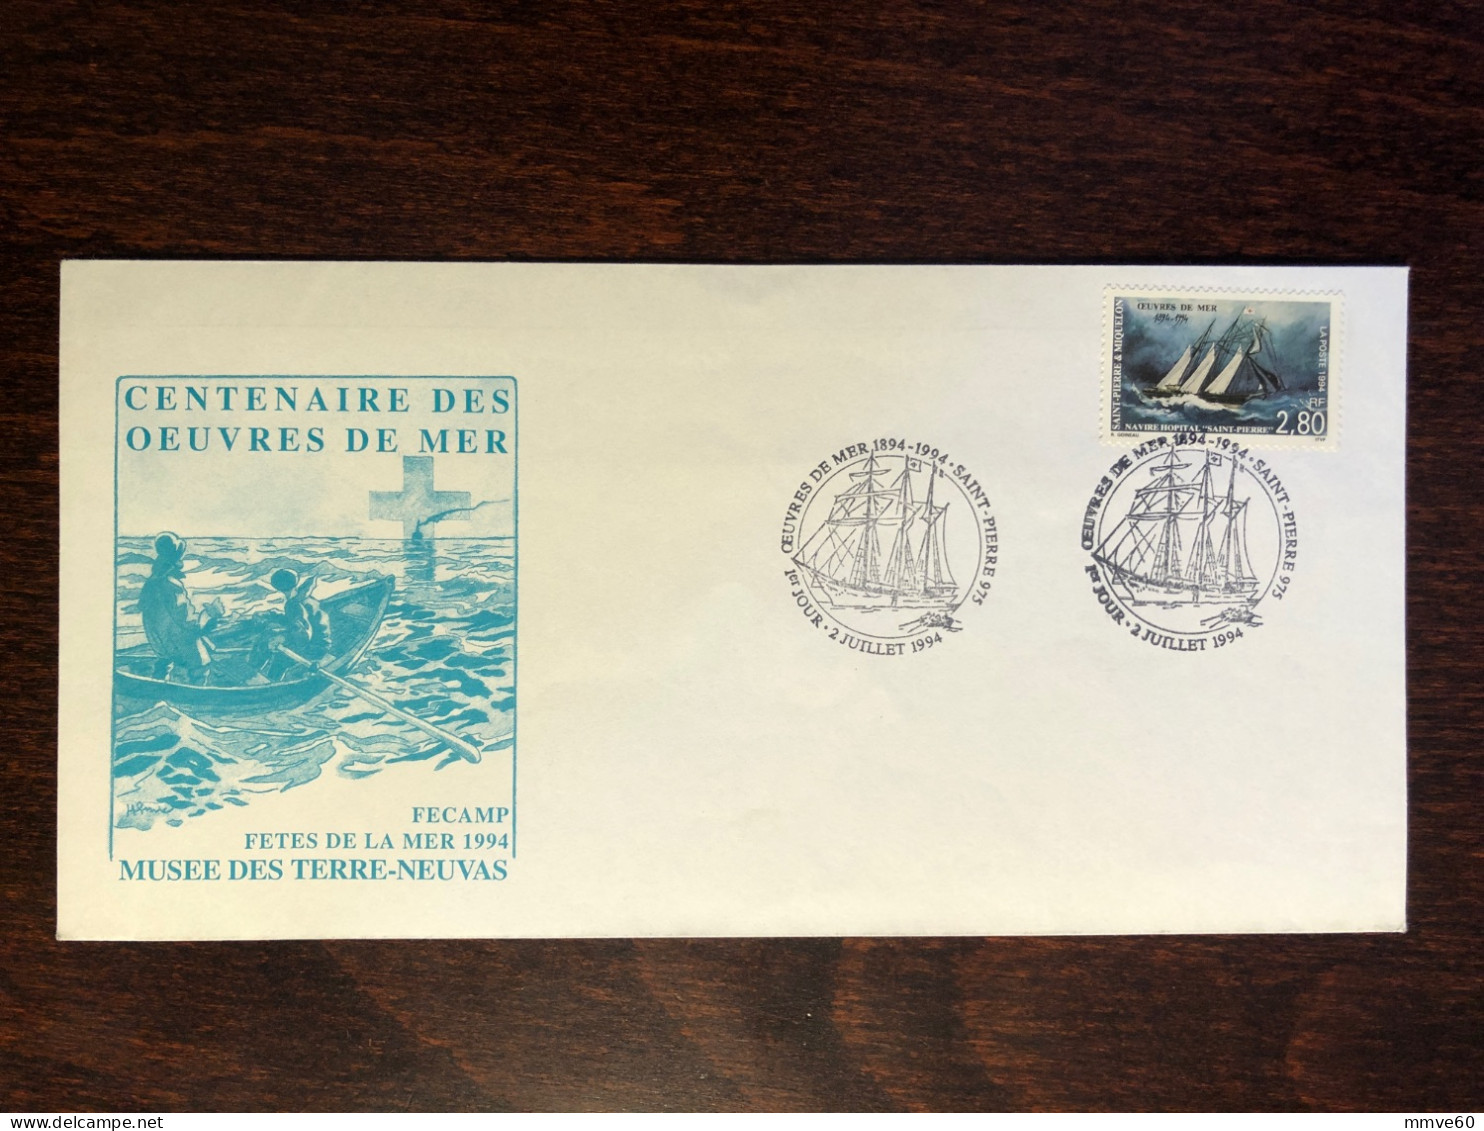 ST PIERRE & MIQUELON FDC COVER 1994 YEAR HOSPITAL SHIP HEALTH MEDICINE STAMPS - FDC